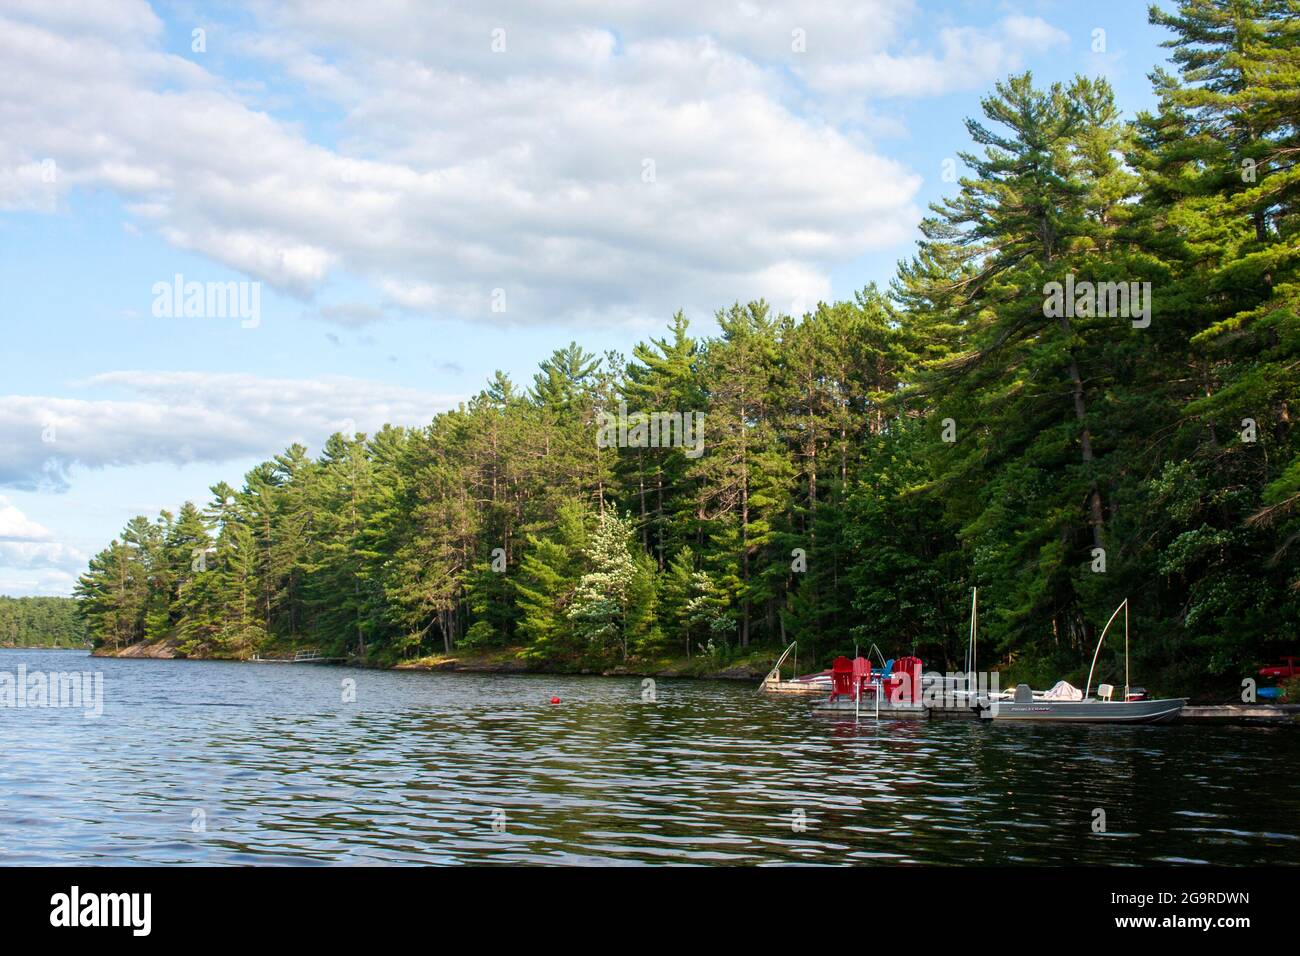 Docks and boats along the water of a lake in Muskoka, Ontario Stock Photo